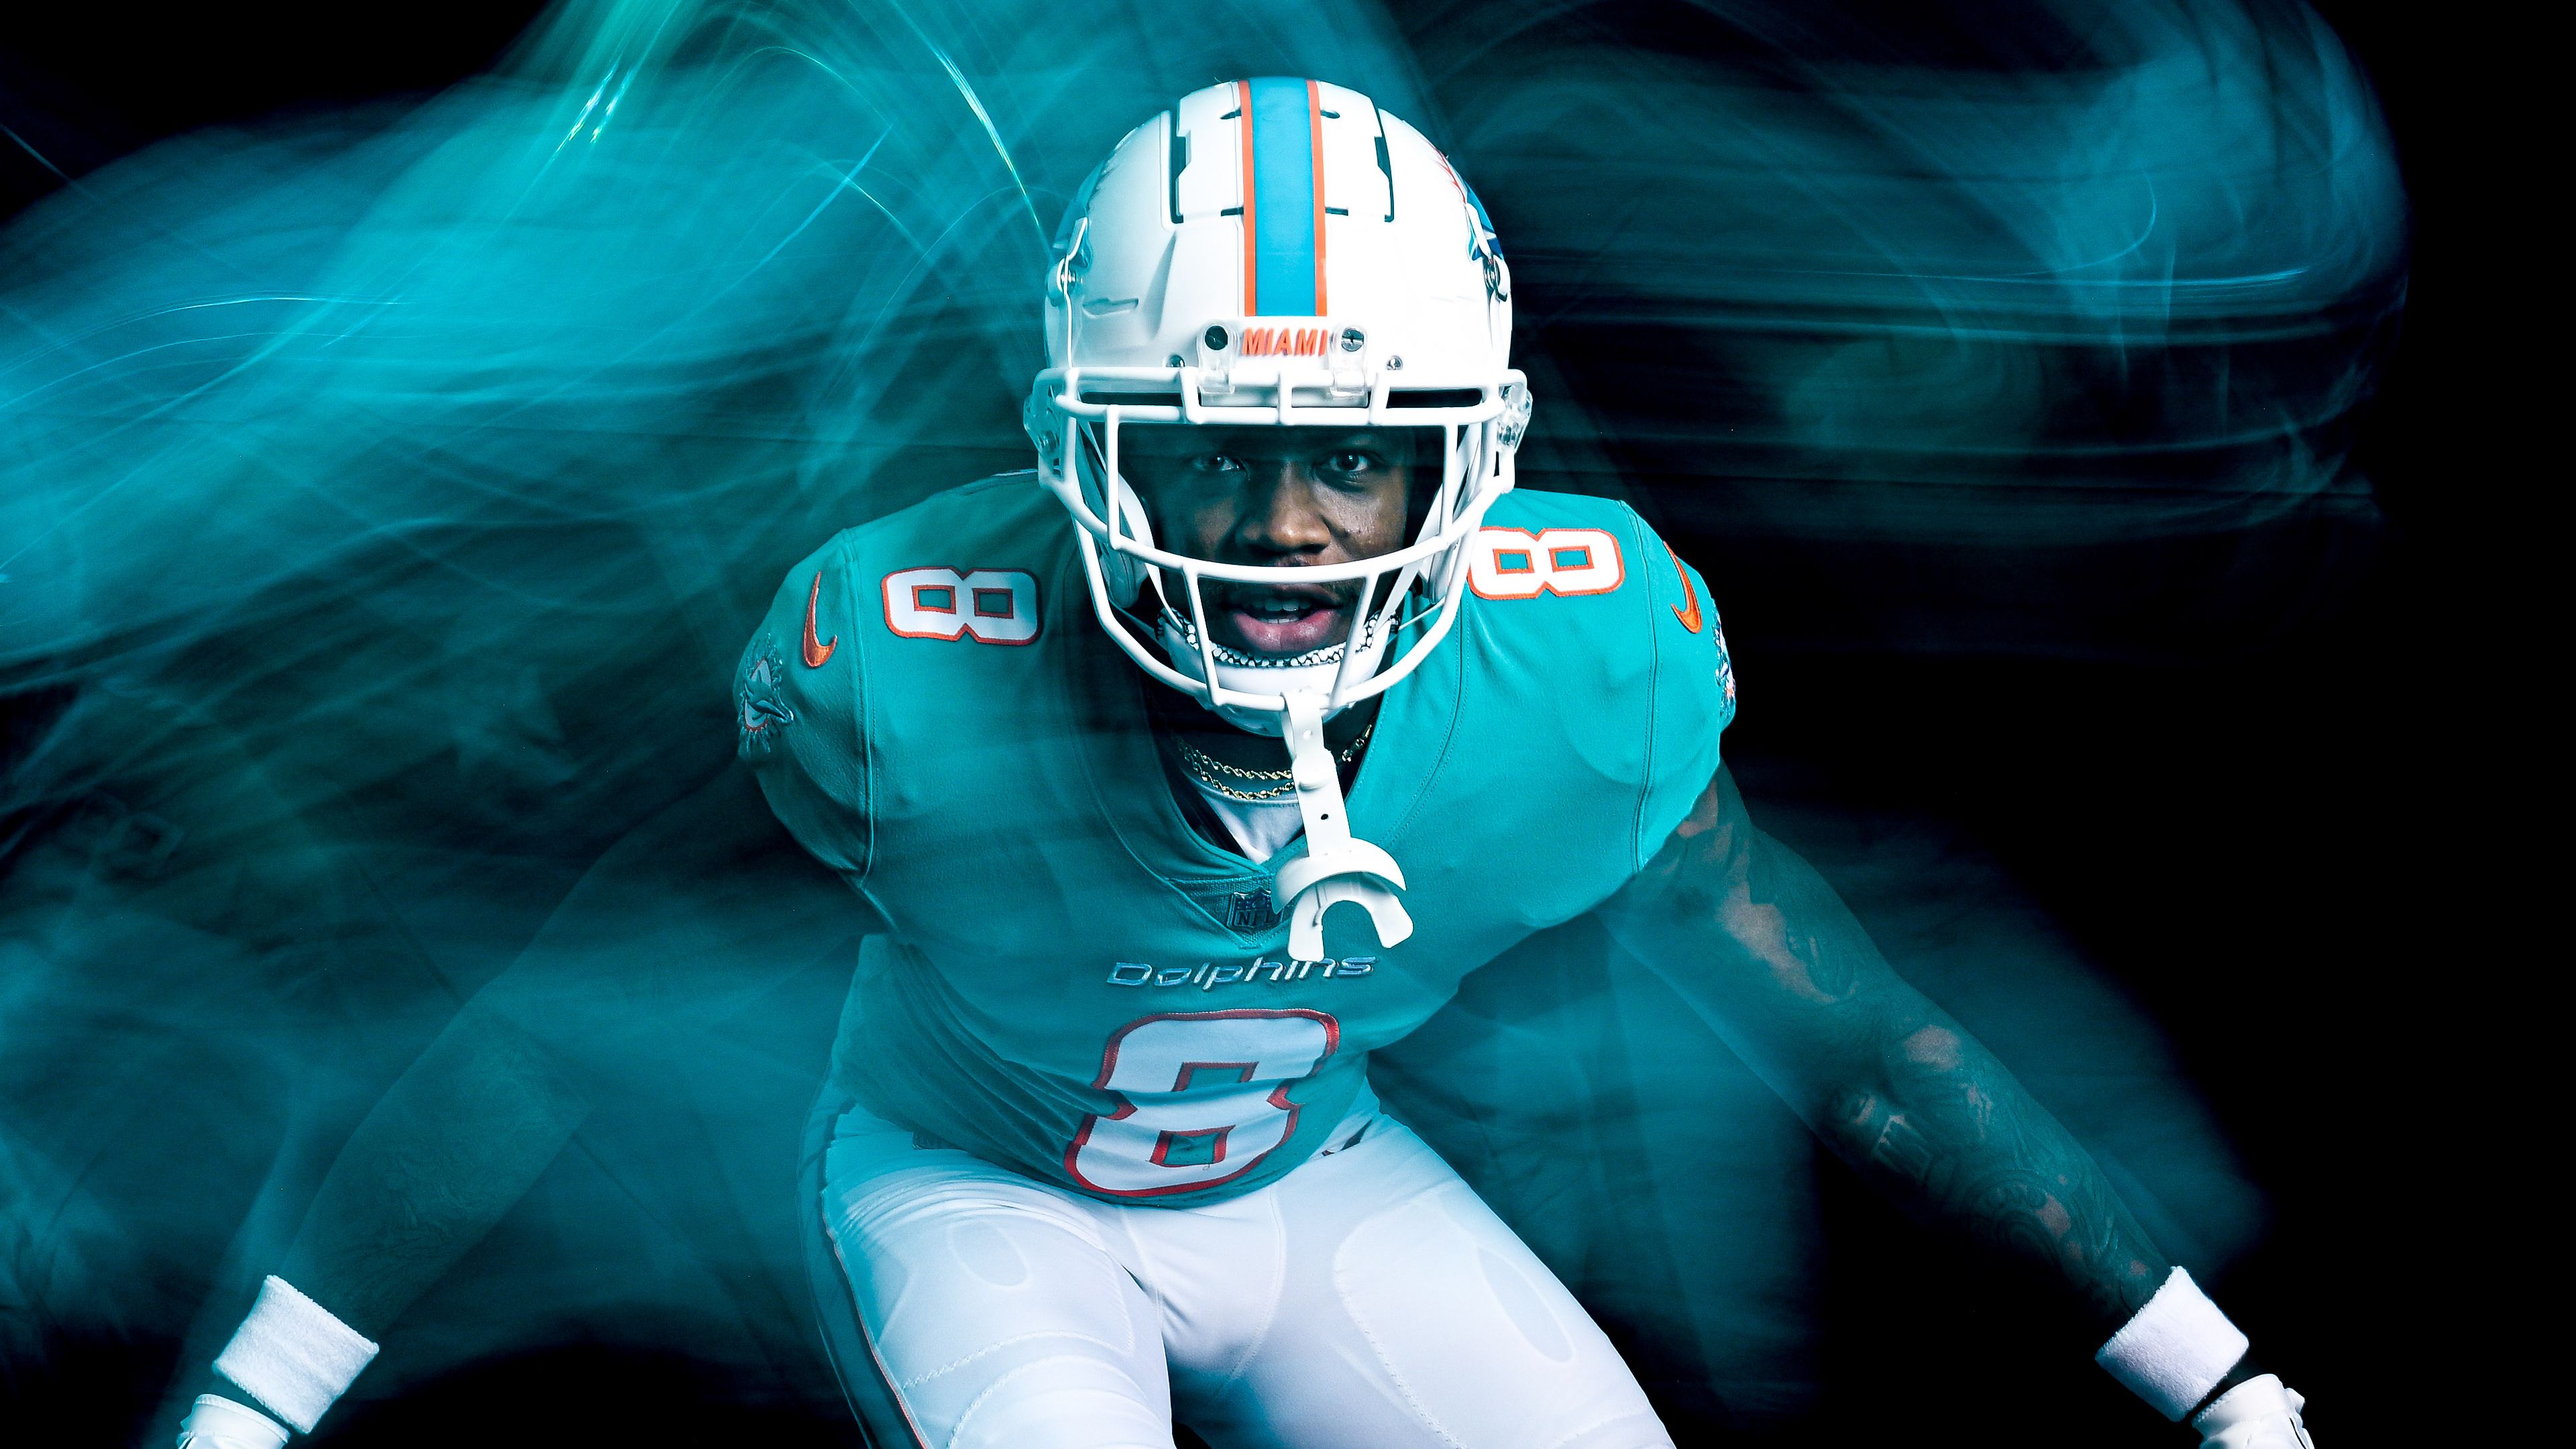 nfl live miami dolphins